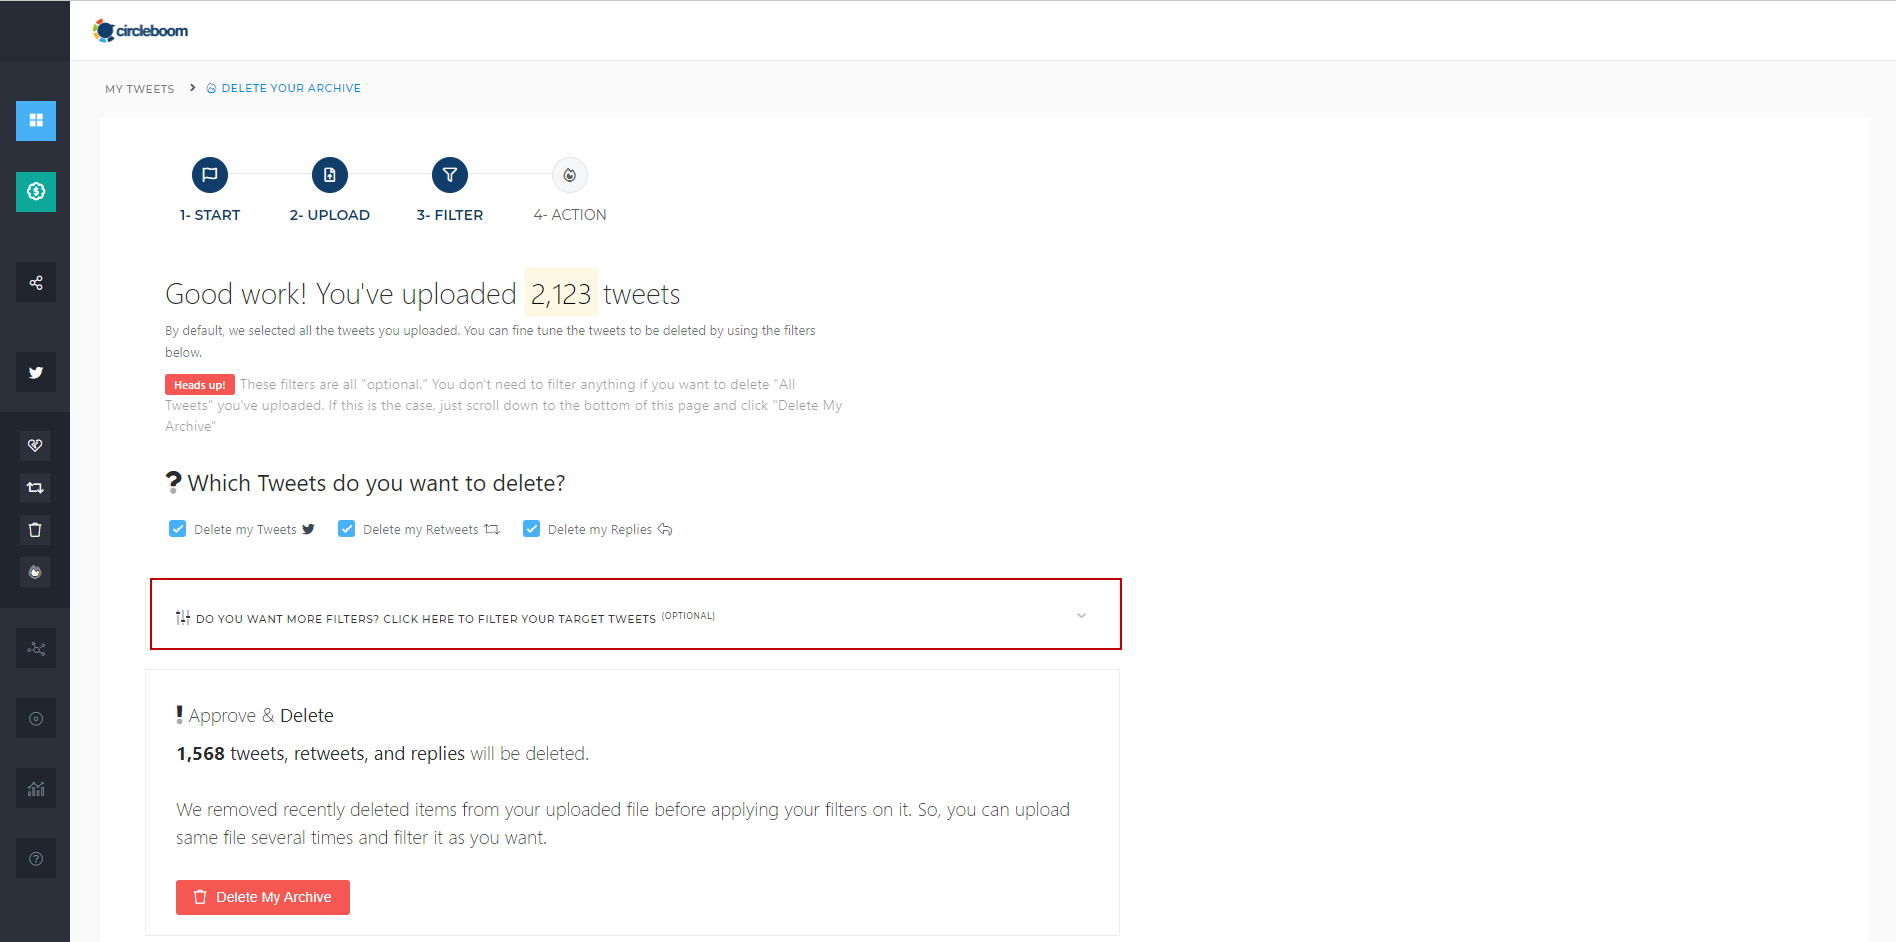 Get Circleboom’s Twitter Archive Deleter to erase your tweets in bulk!